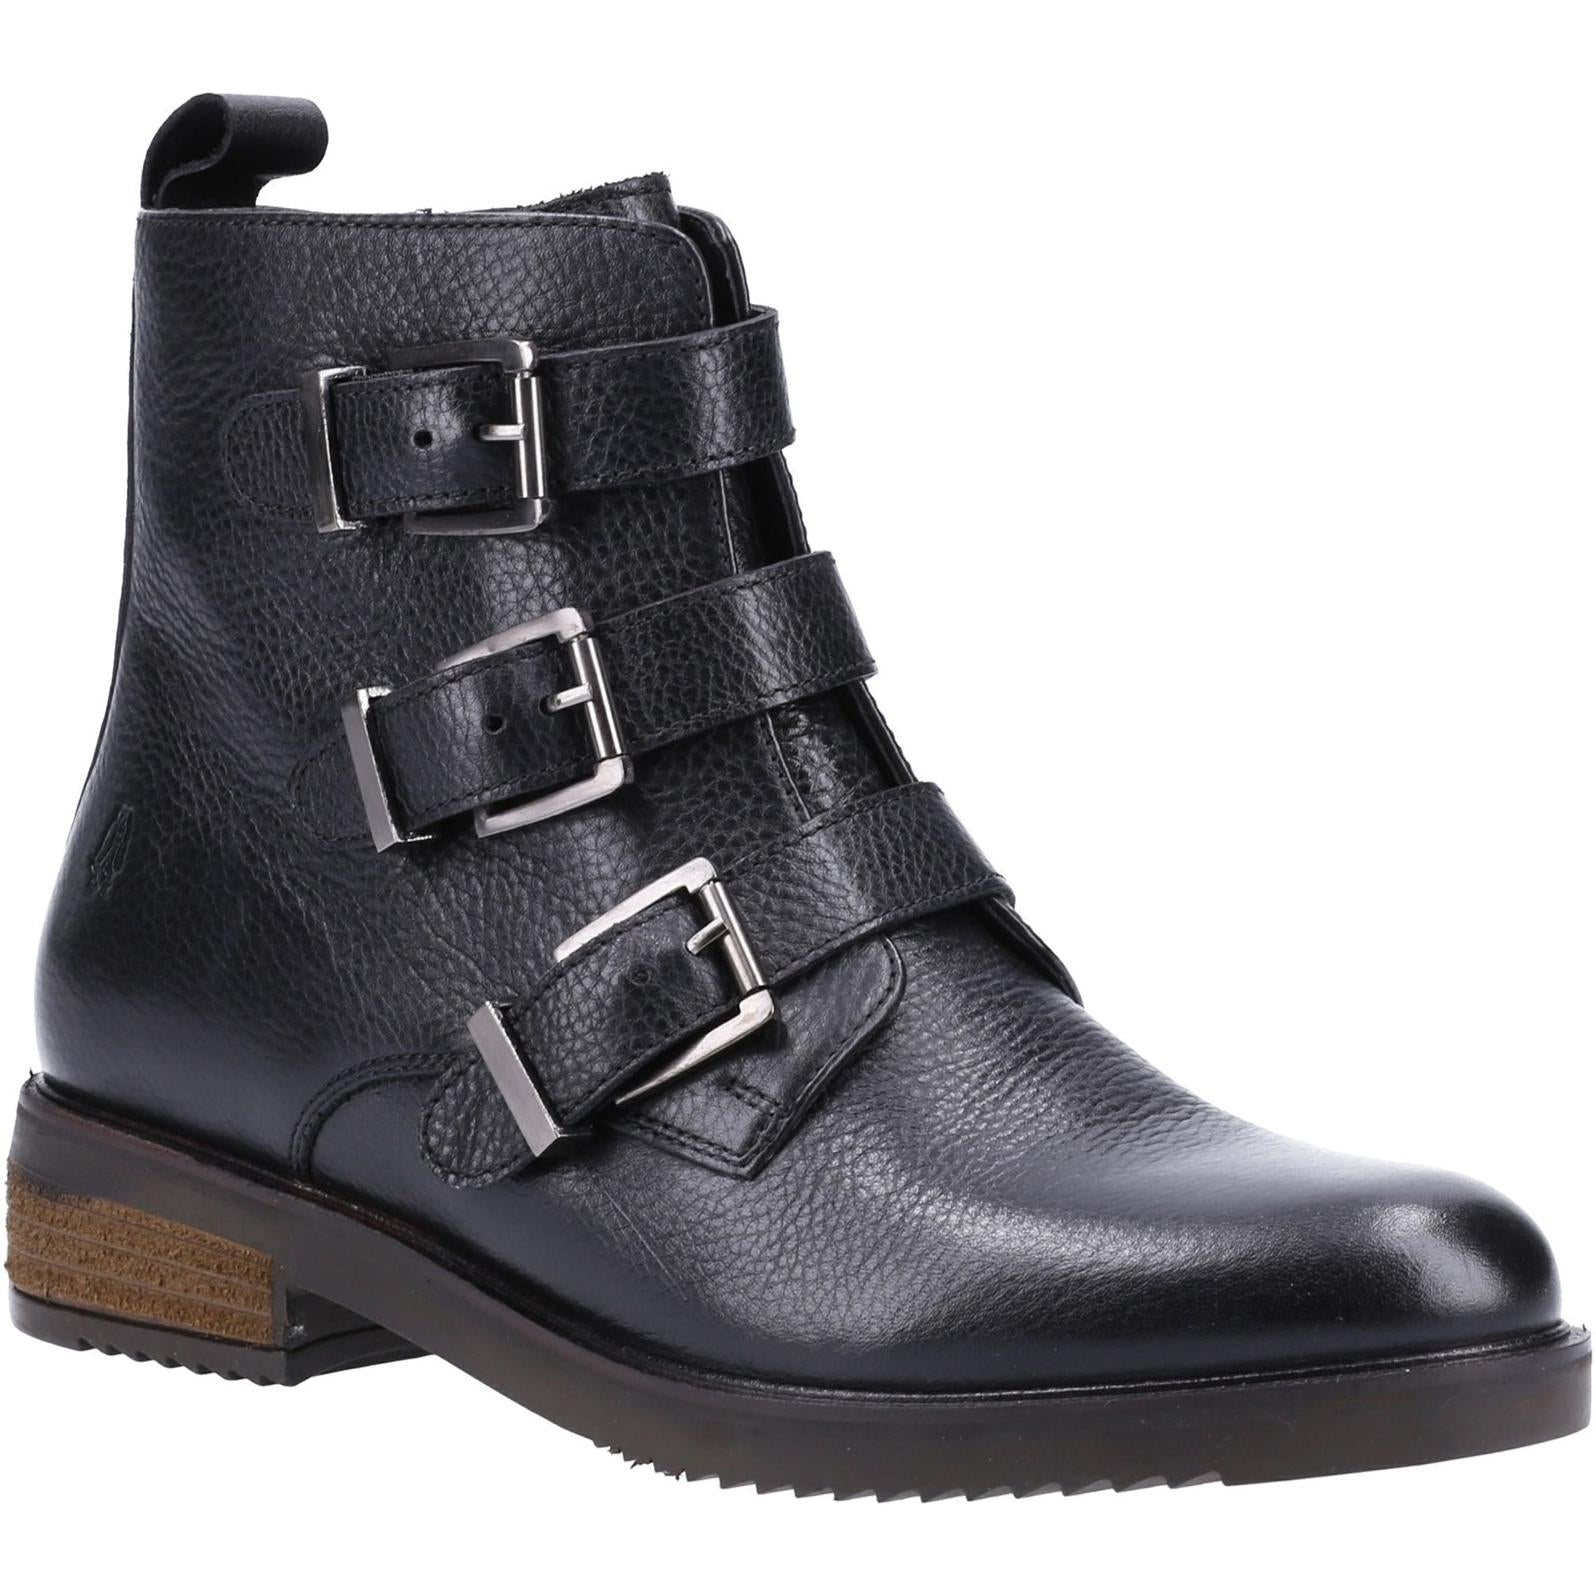 Hush Puppies Pria Ankle Boot